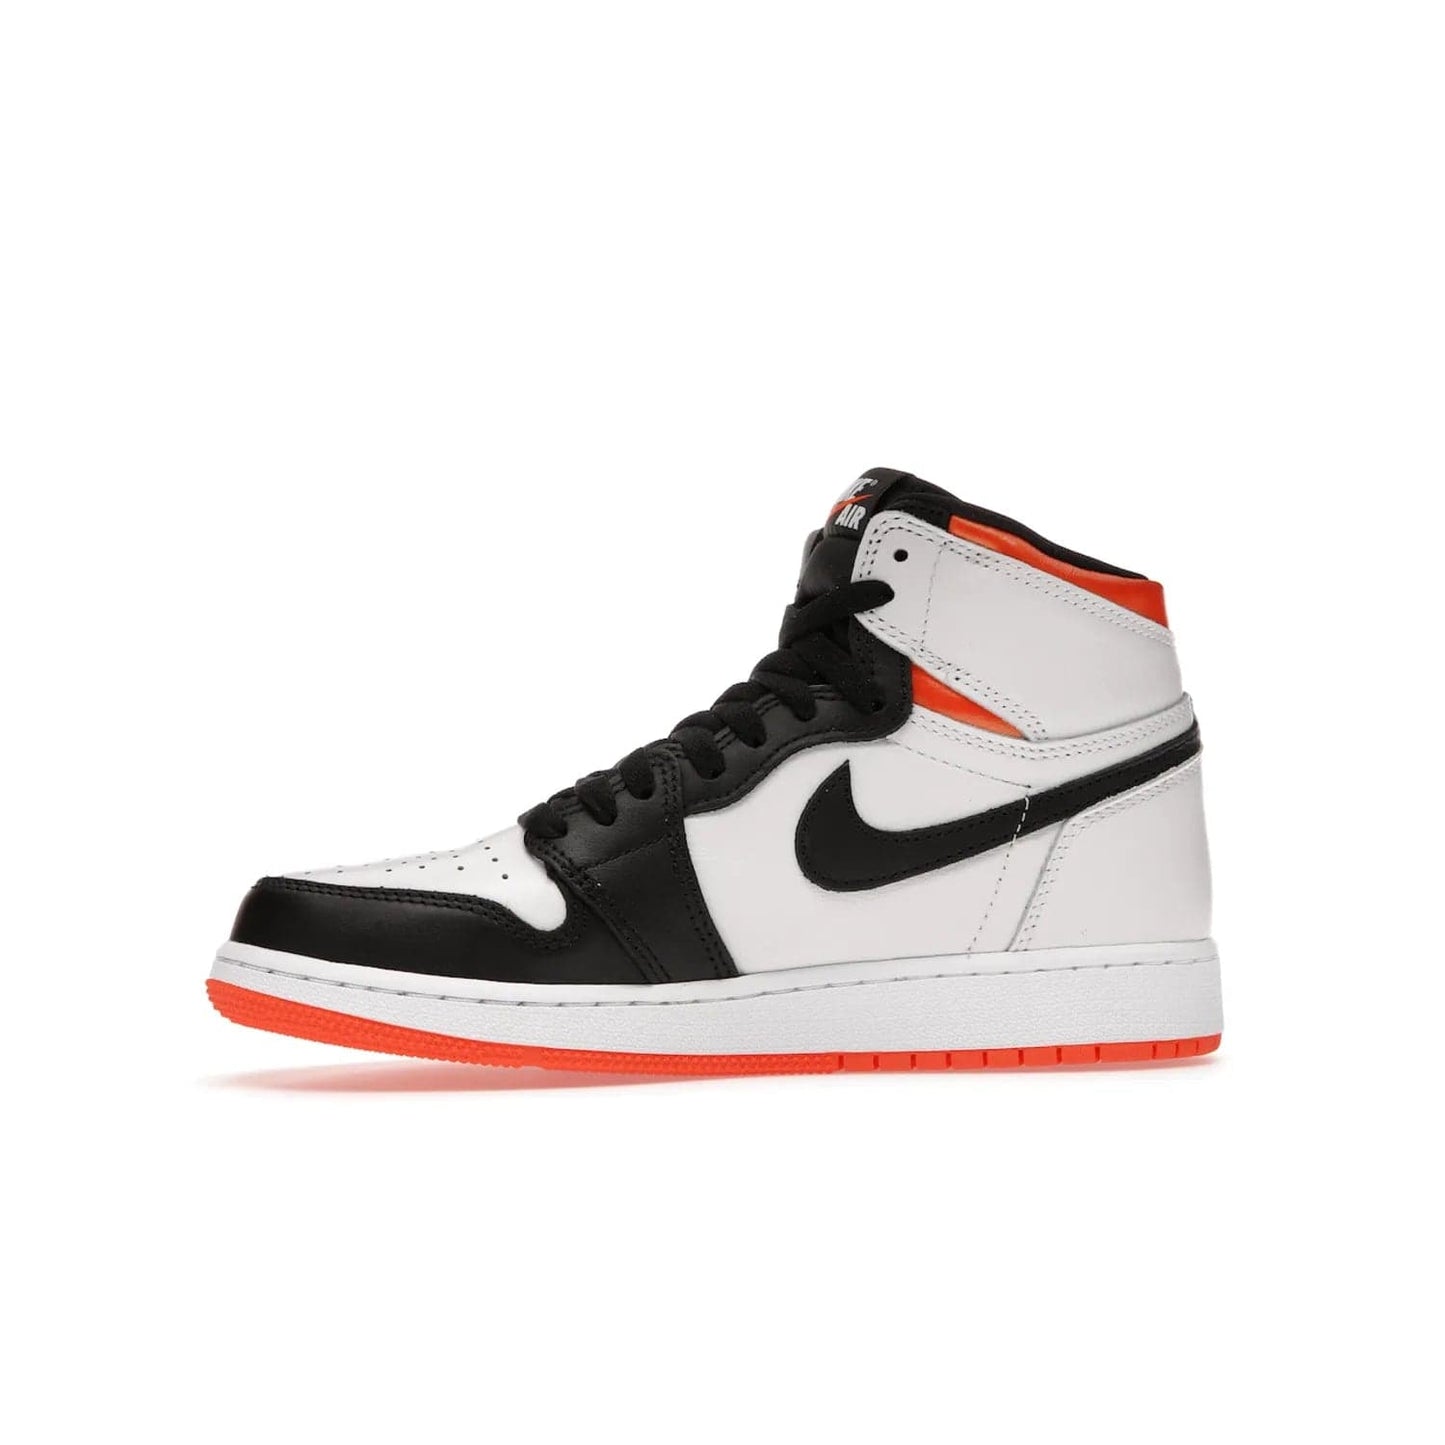 Jordan 1 High OG Electro Orange (GS) - Image 18 - Only at www.BallersClubKickz.com - The Air Jordan 1 High OG Electro Orange GS is the ideal shoe for kids on the go. Featuring white leather uppers, black overlays, and bright orange accents, it's sure to become a favorite. A great mix of classic style and vibrant colors, the shoe delivers air cushioning for comfort and hard orange rubber for grip. Release on July 17th, 2021. Get them a pair today.